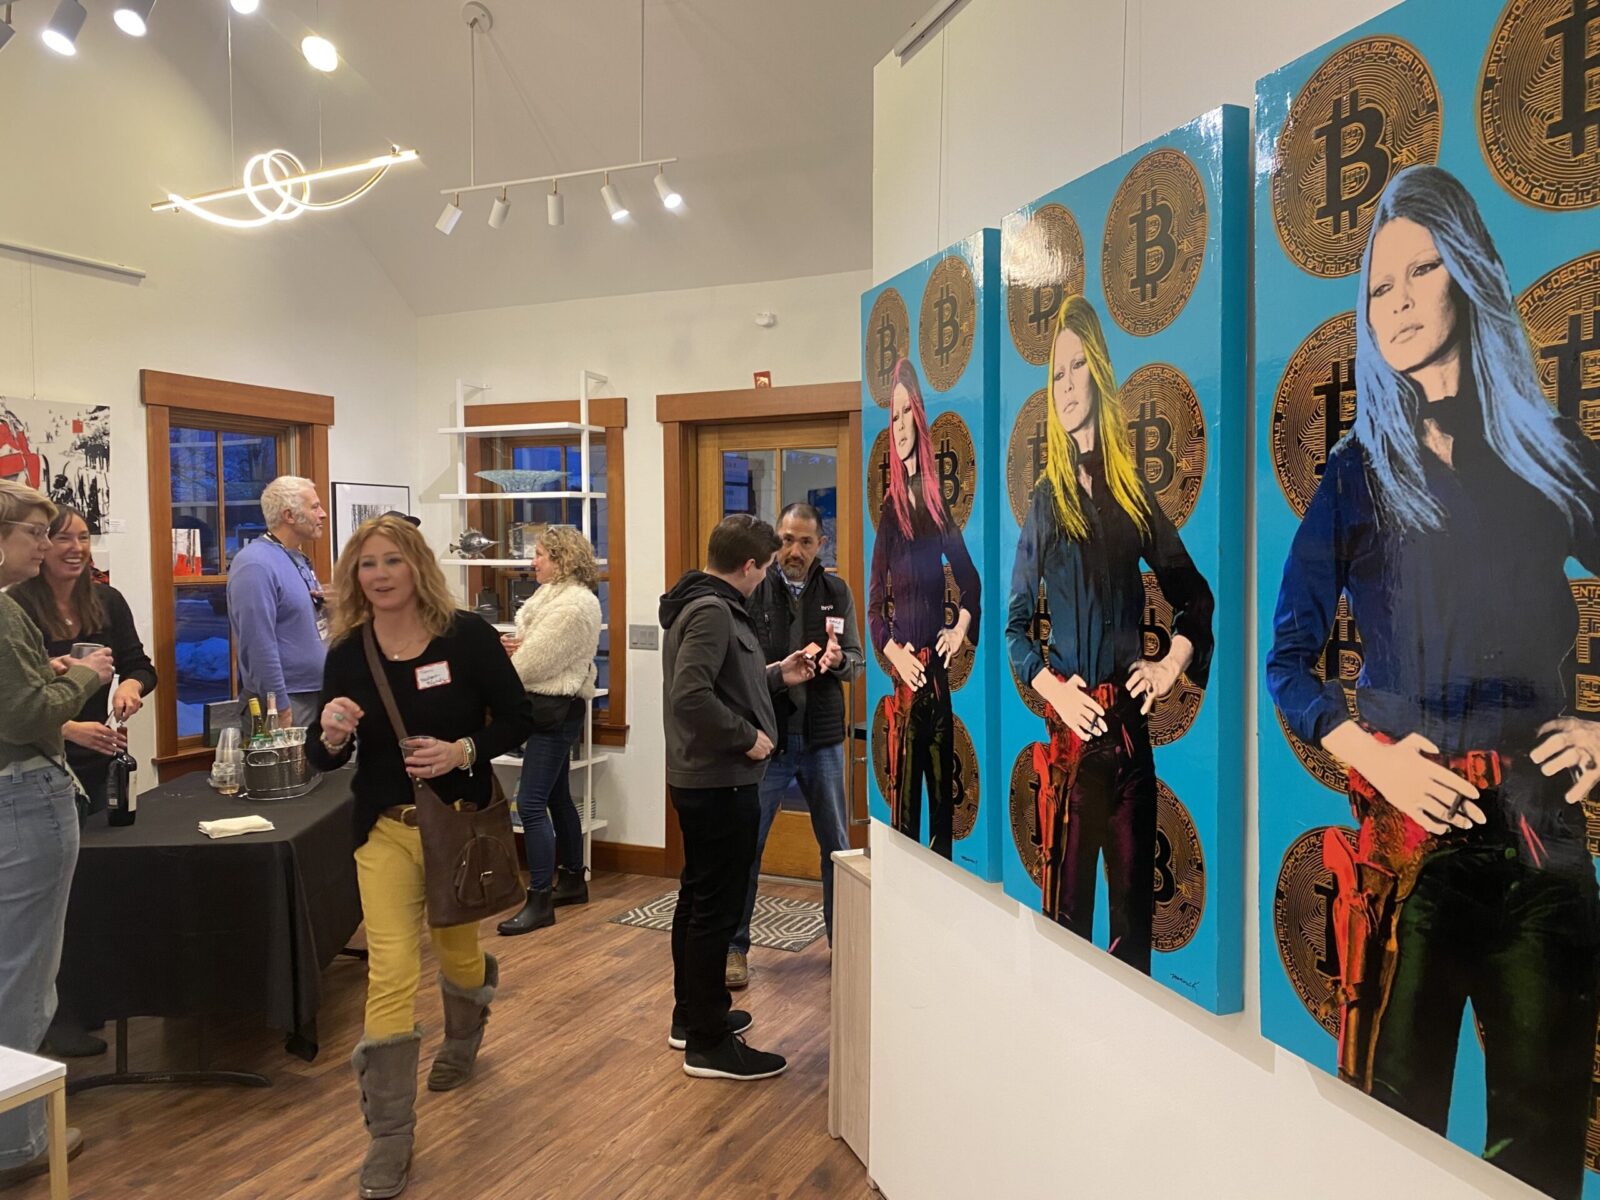 January Networking Mixer at Piper J Gallery